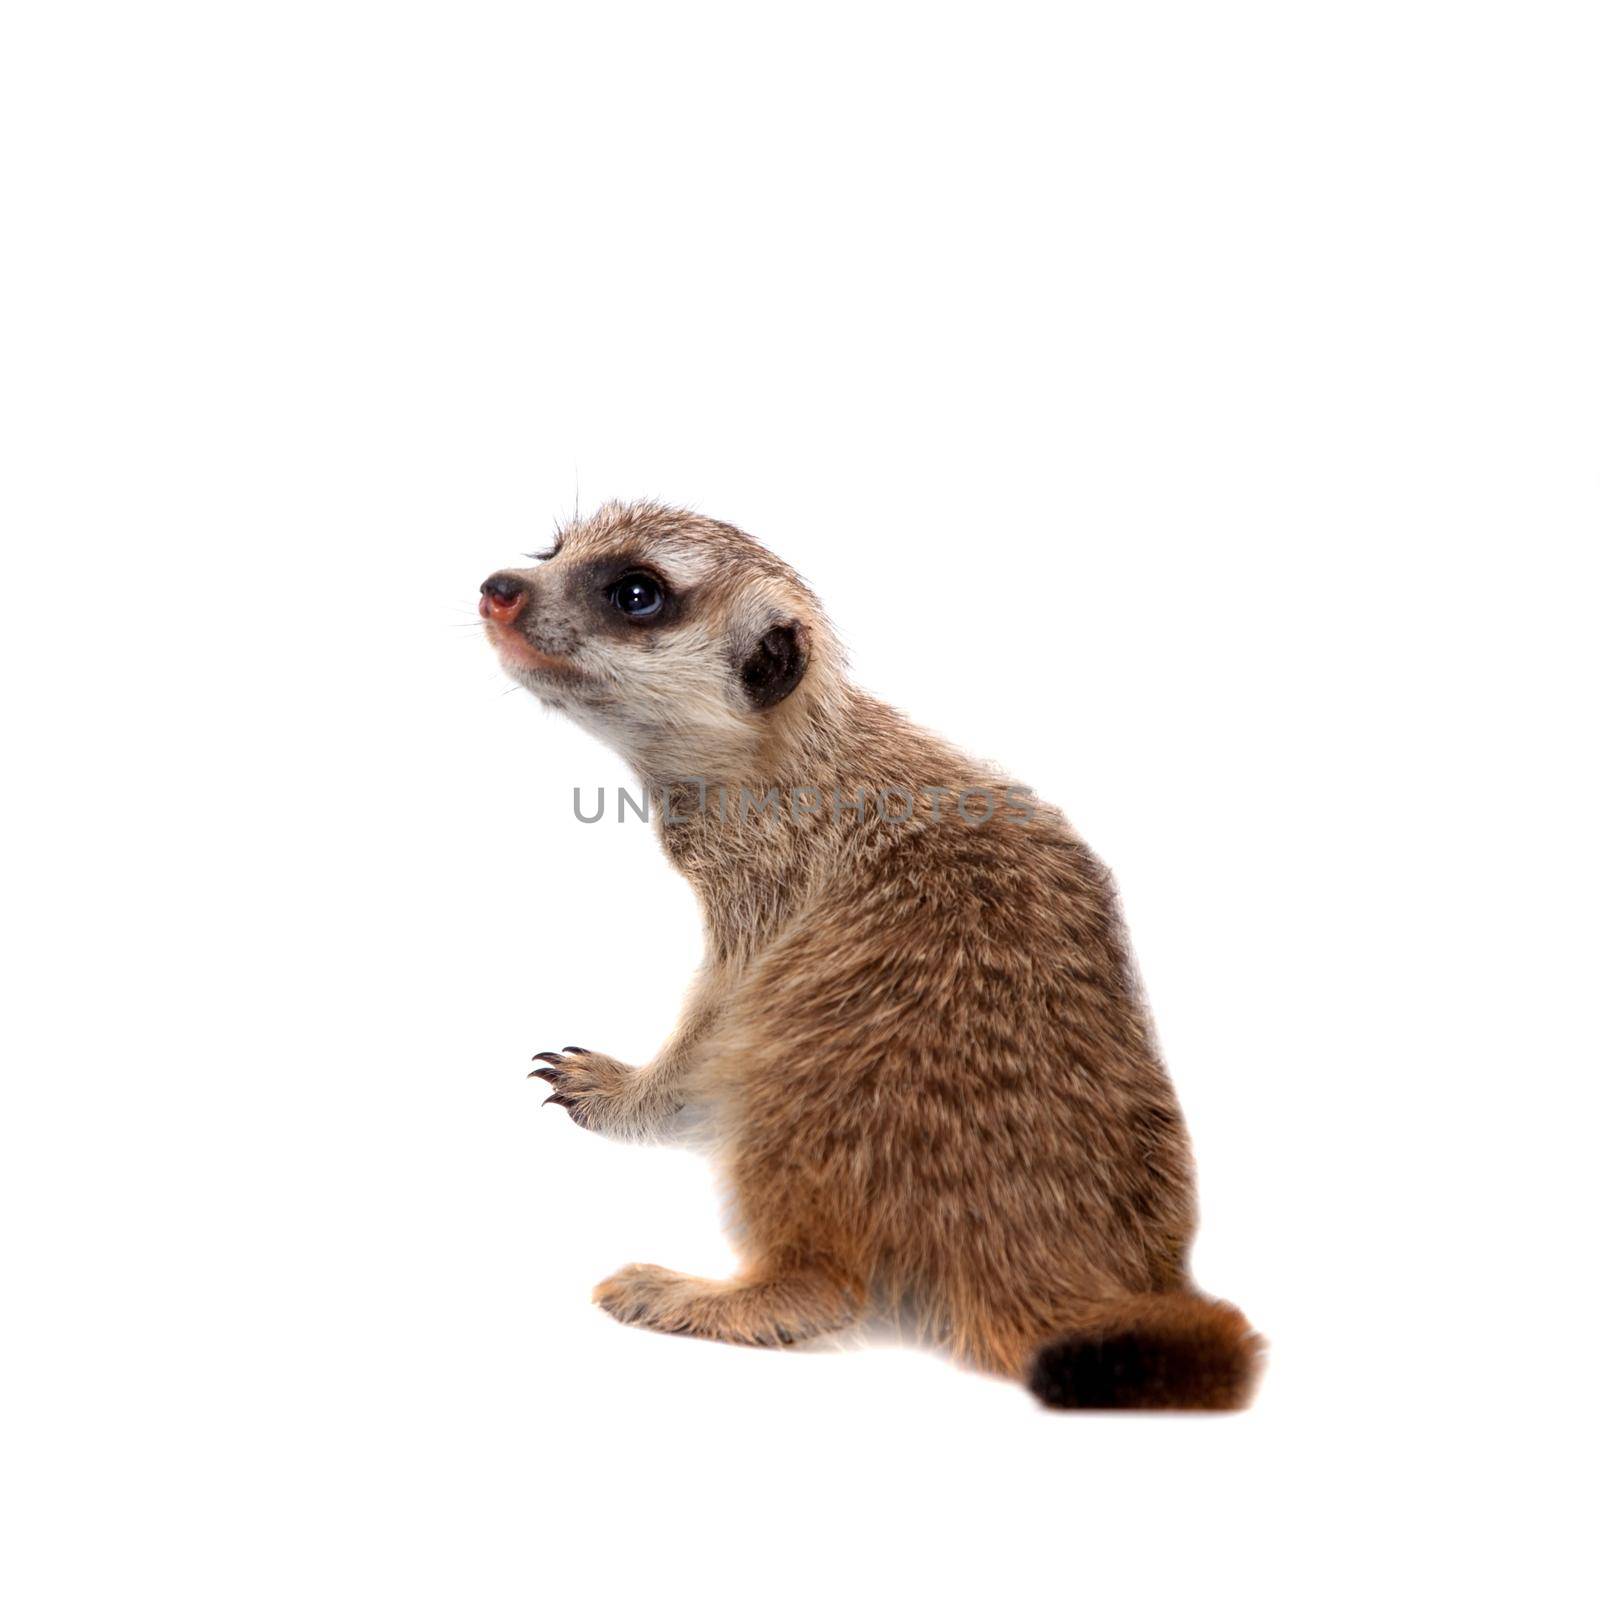 The meerkat or suricate cub, 1 months old, on white by RosaJay